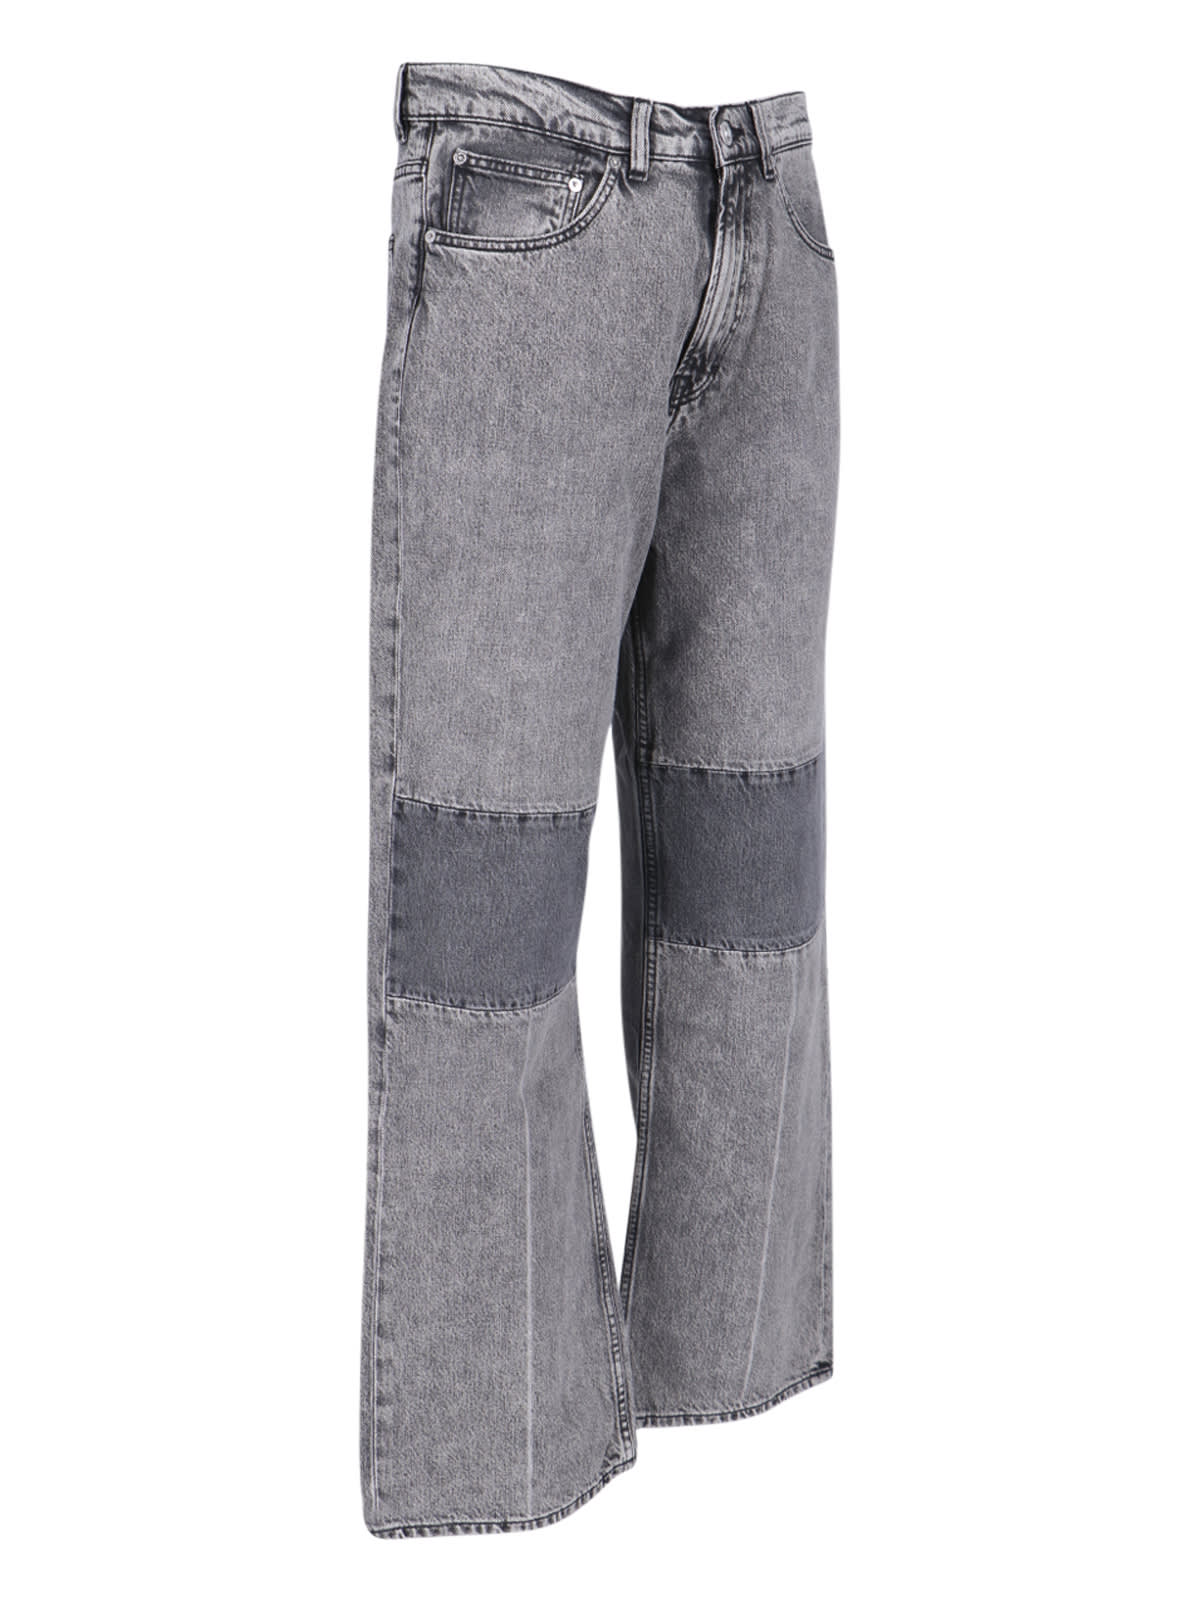 Shop Our Legacy Extended Third Cut Jeans In Gray